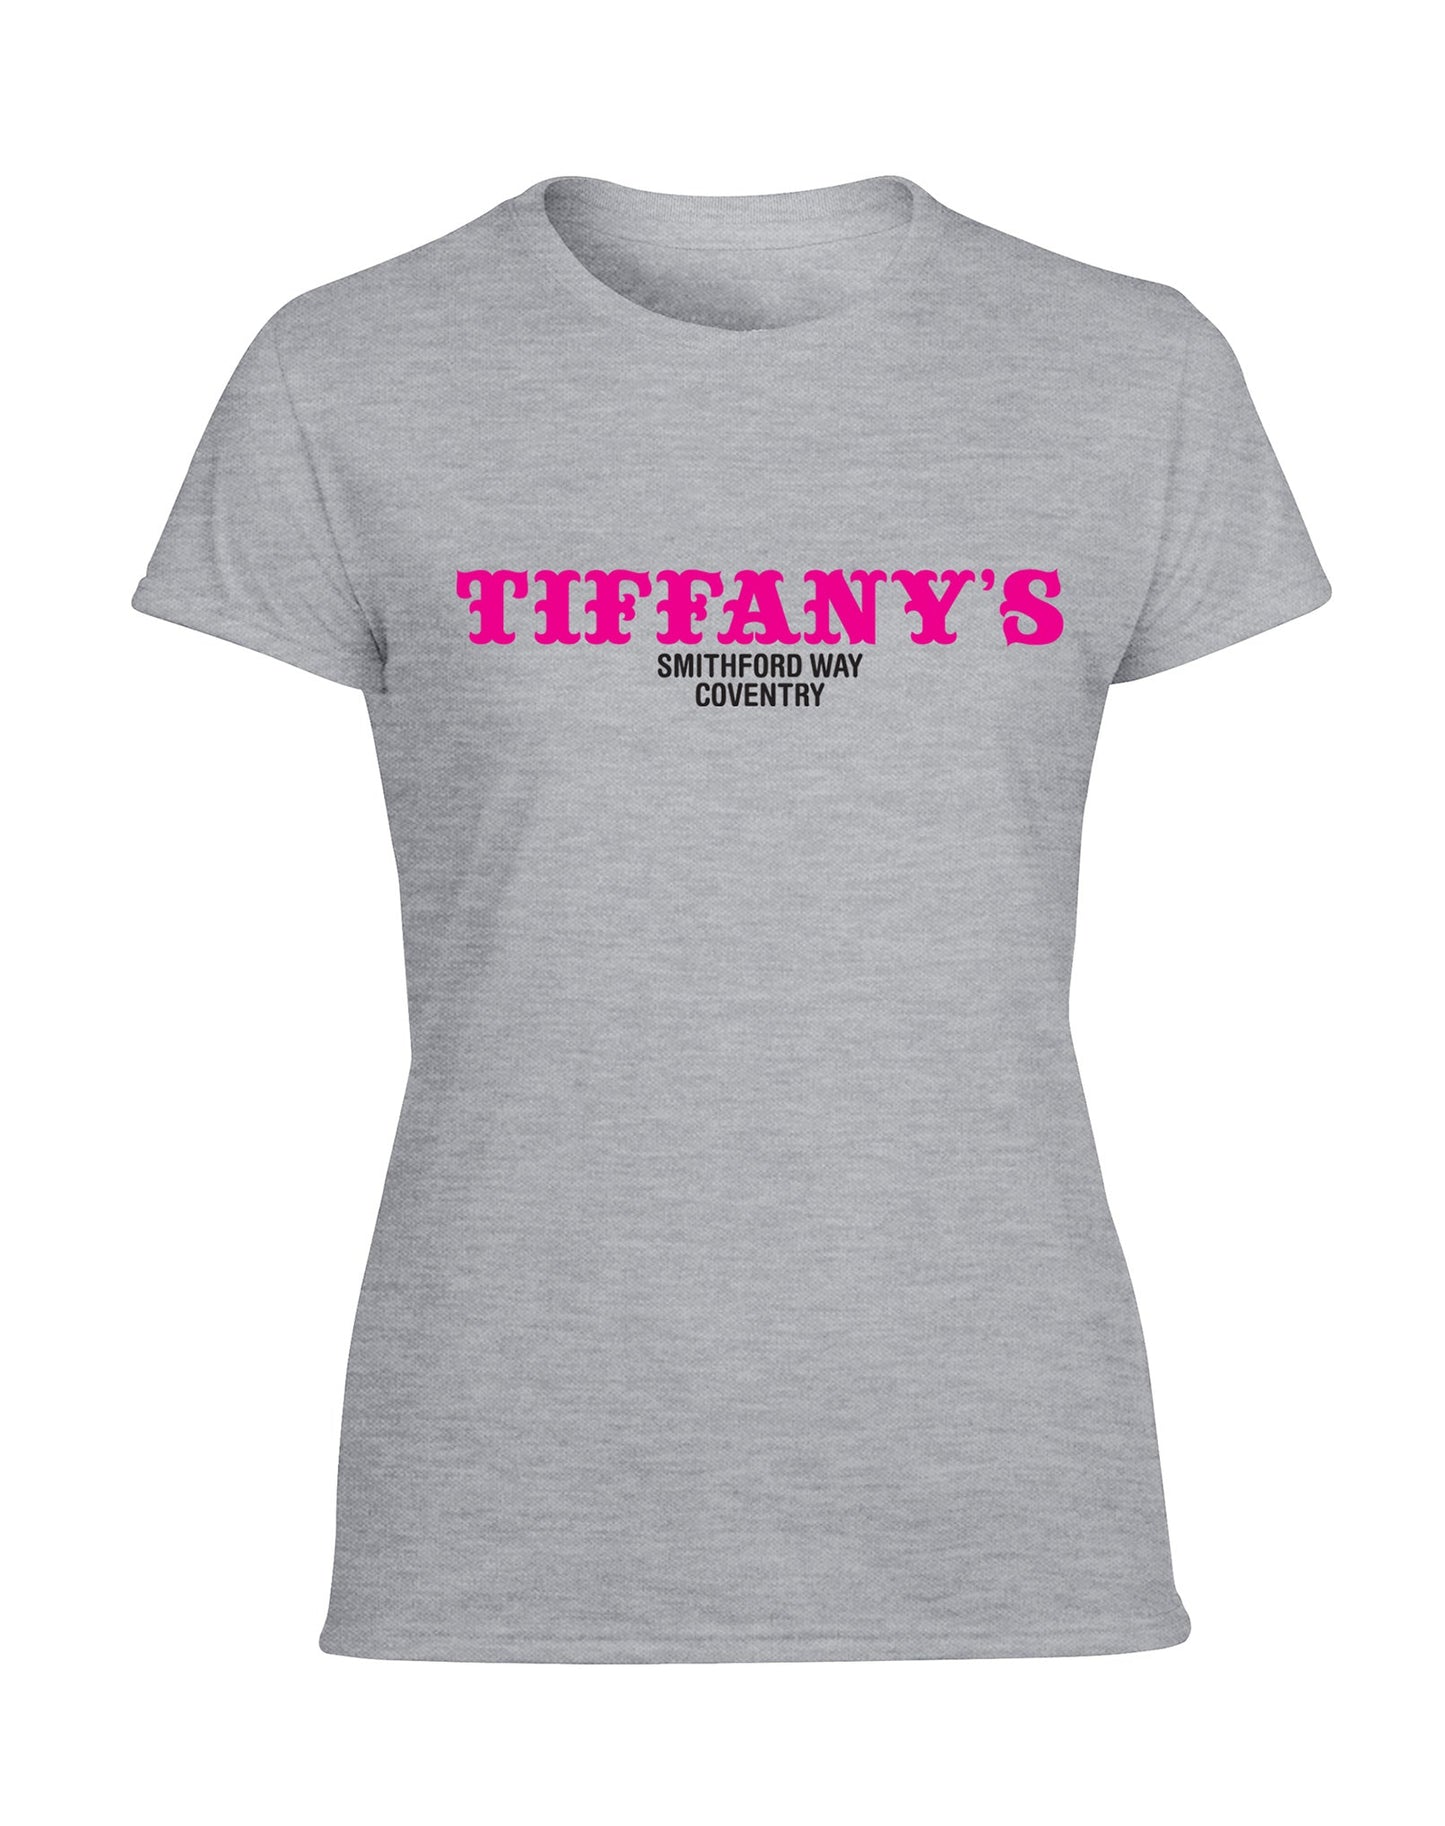 Tiffany's Coventry ladies fit t-shirt - various colours - Dirty Stop Outs